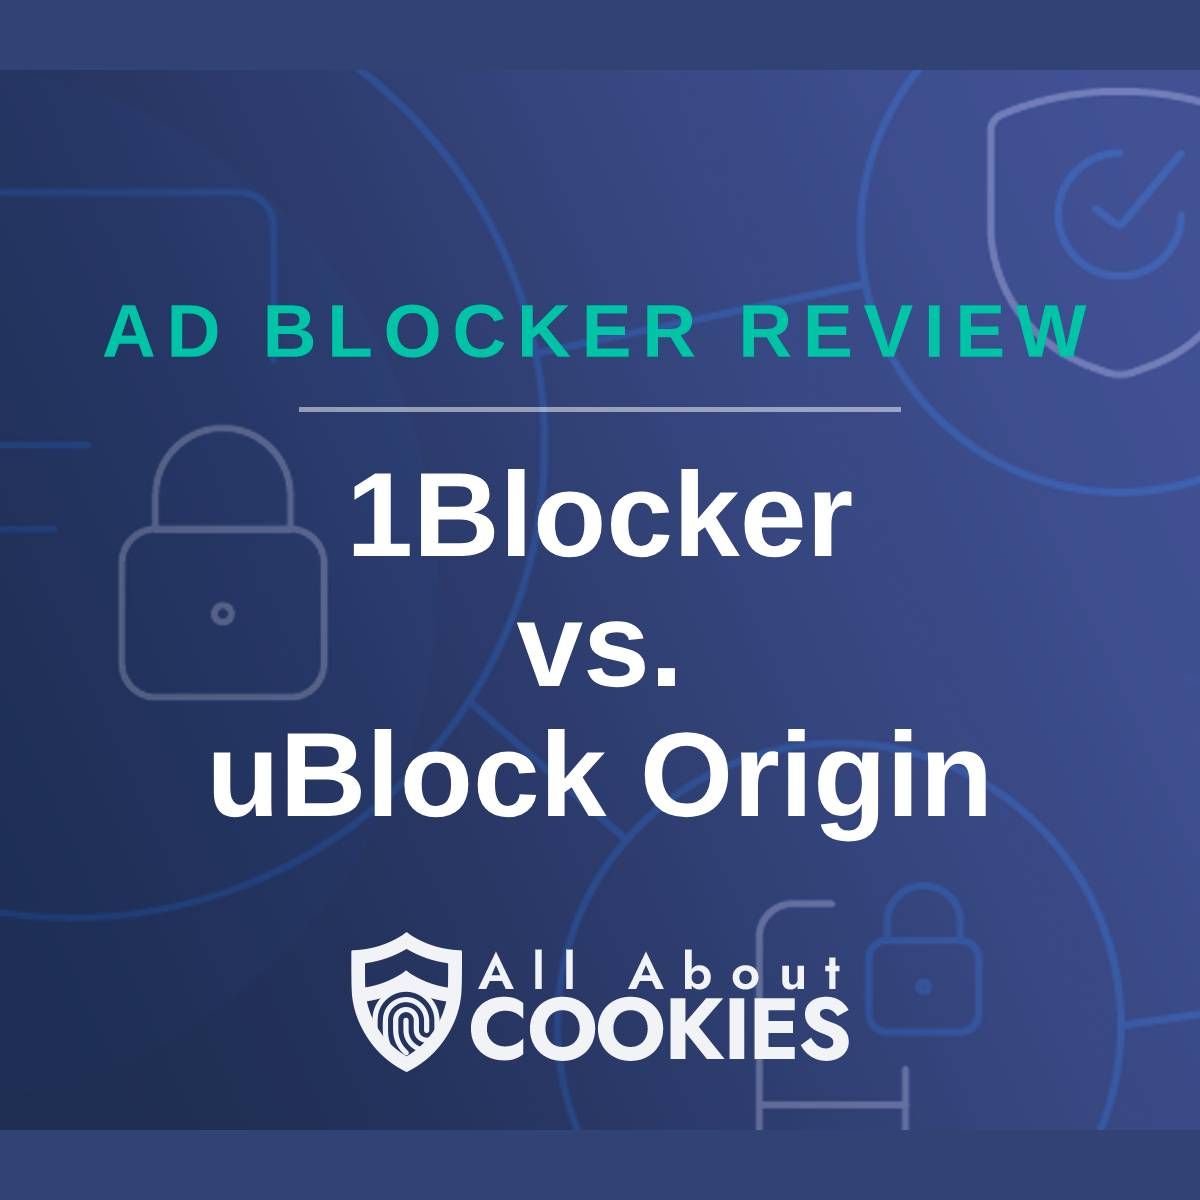 A blue background with images of locks and shields and the text &quot;1Blocker vs. uBlock Origin&quot;